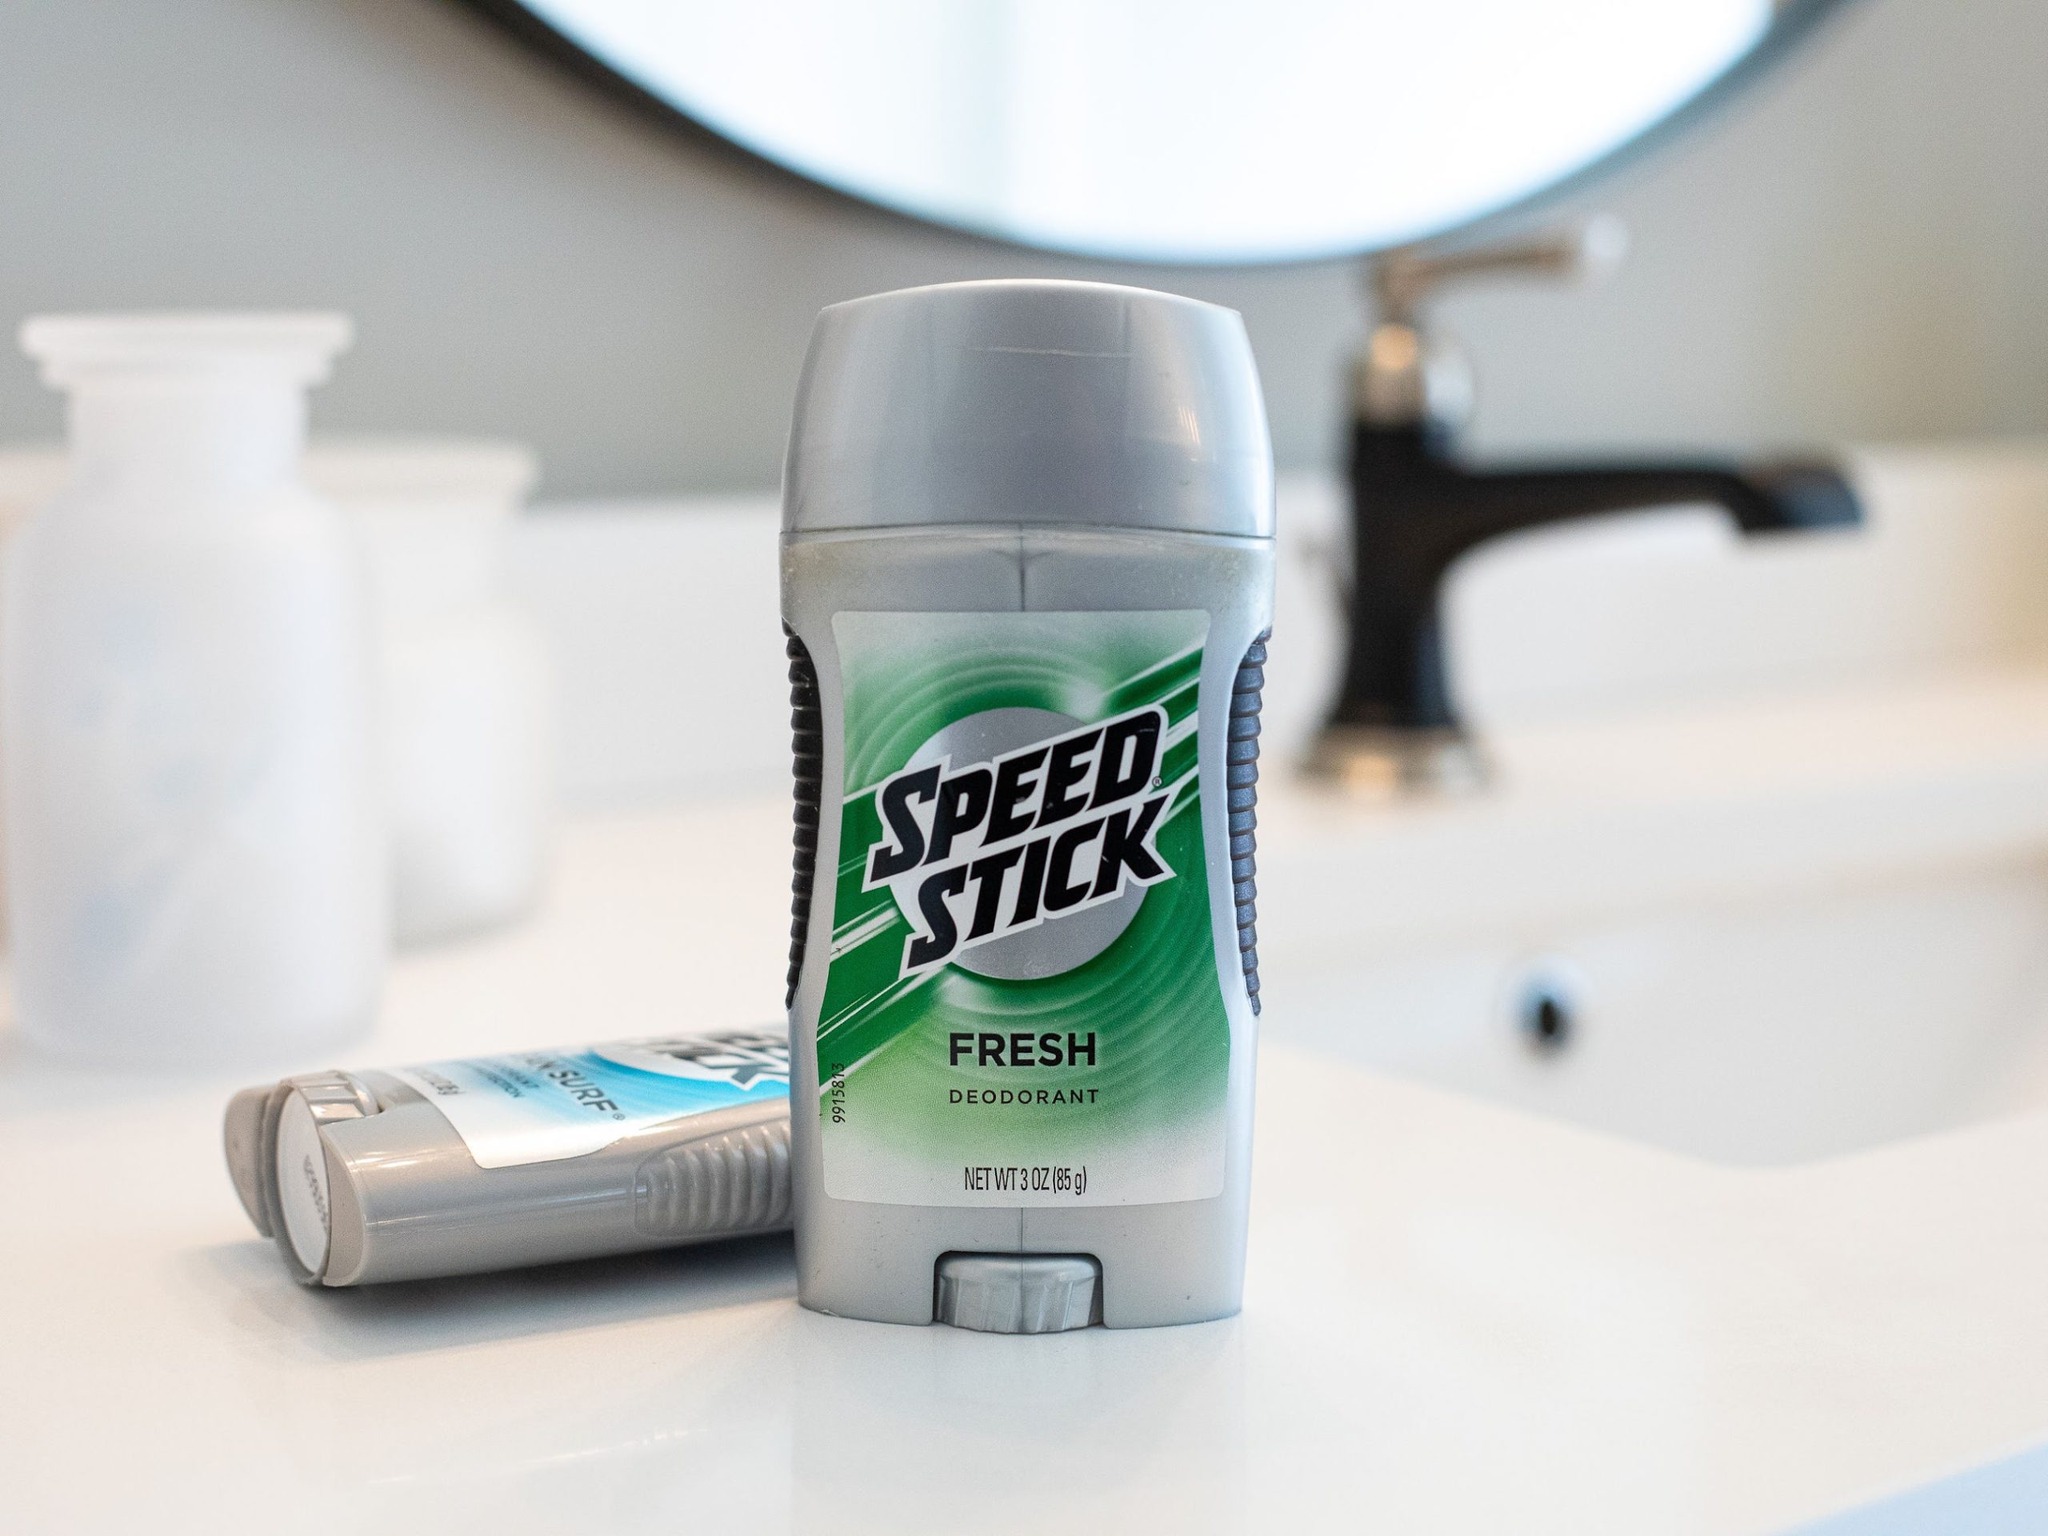 Speed Stick Deodorant As Low As 75¢ At Kroger